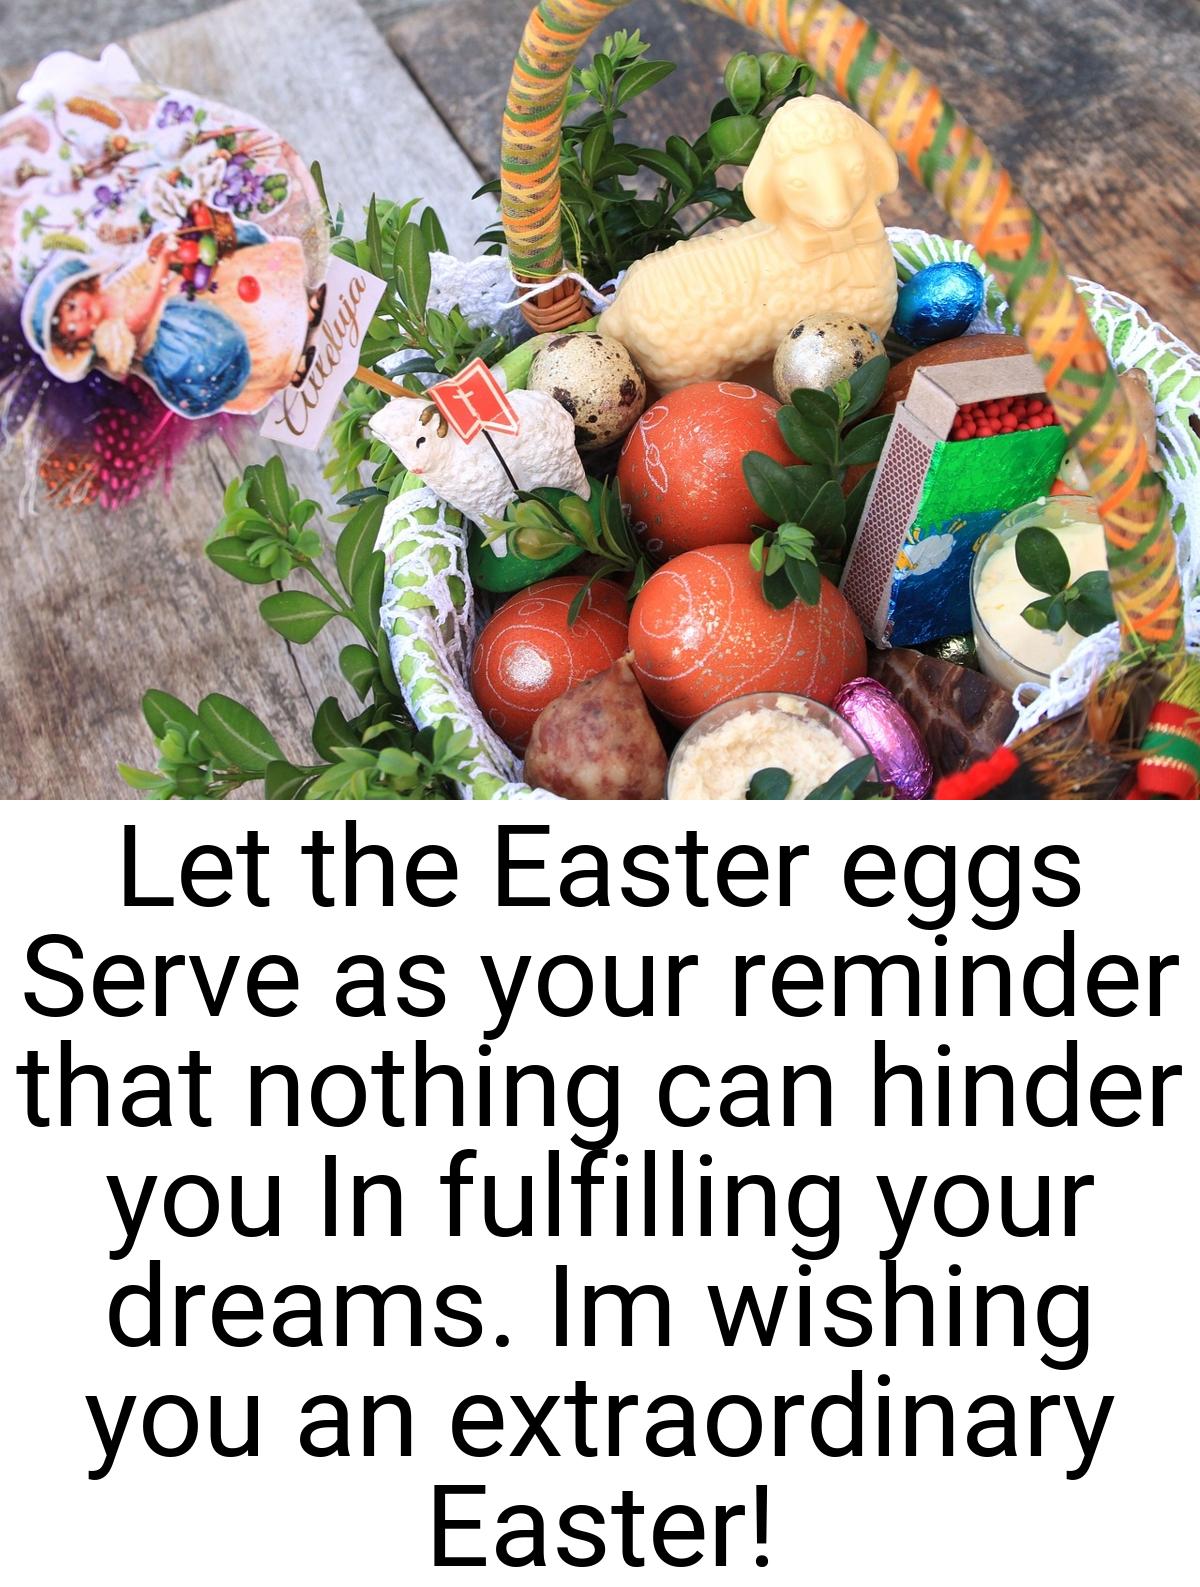 Let the Easter eggs Serve as your reminder that nothing can